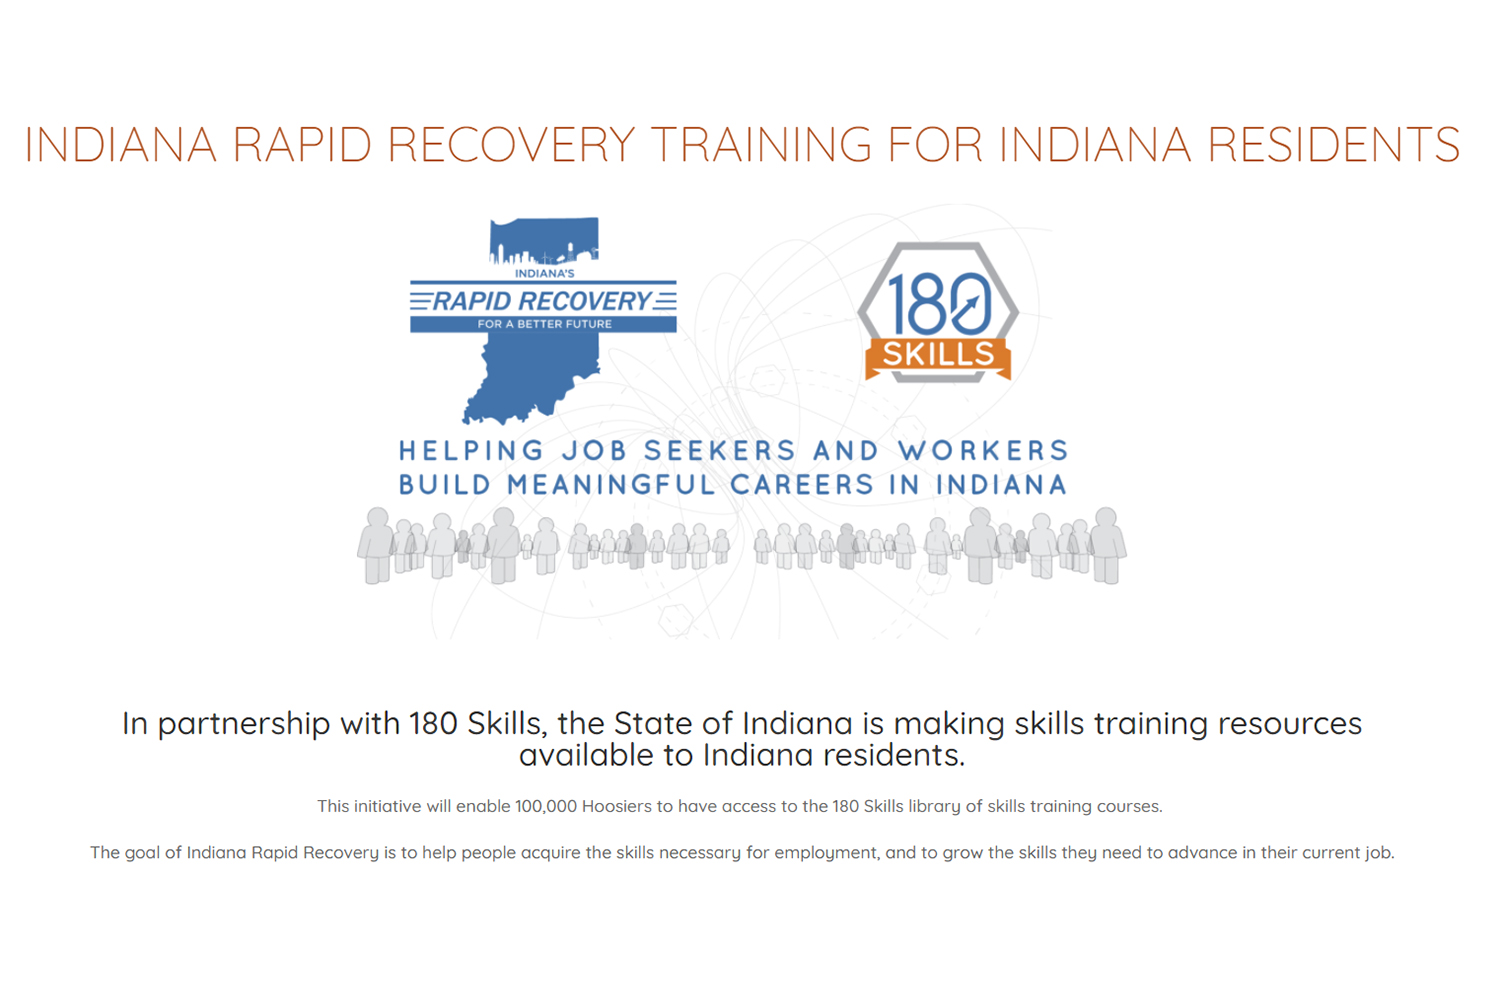 An infographic from indianapolis-based 180 Skills